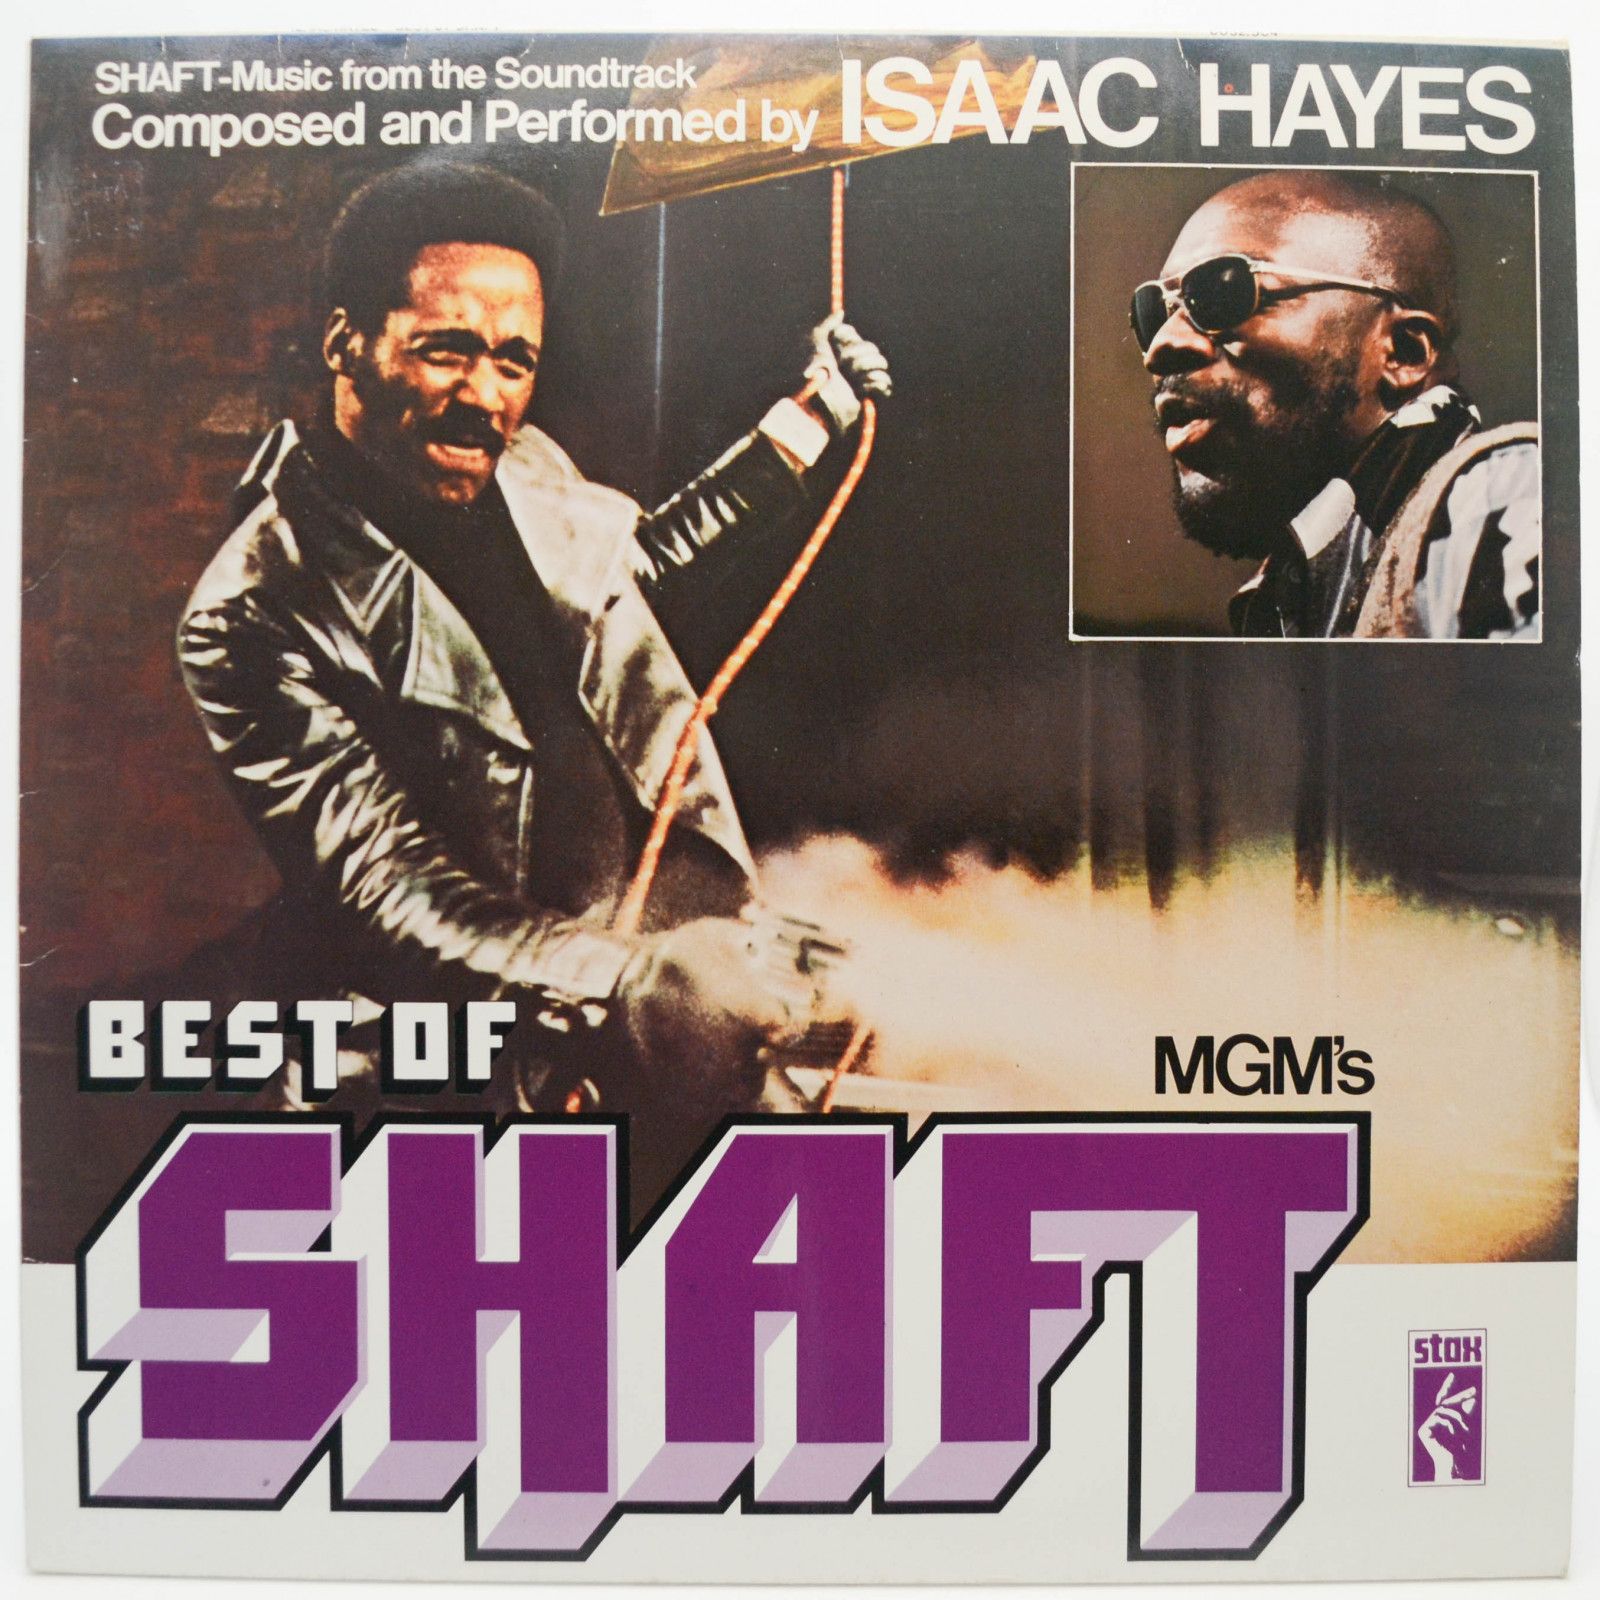 Isaac Hayes — Best Of Shaft, 1972